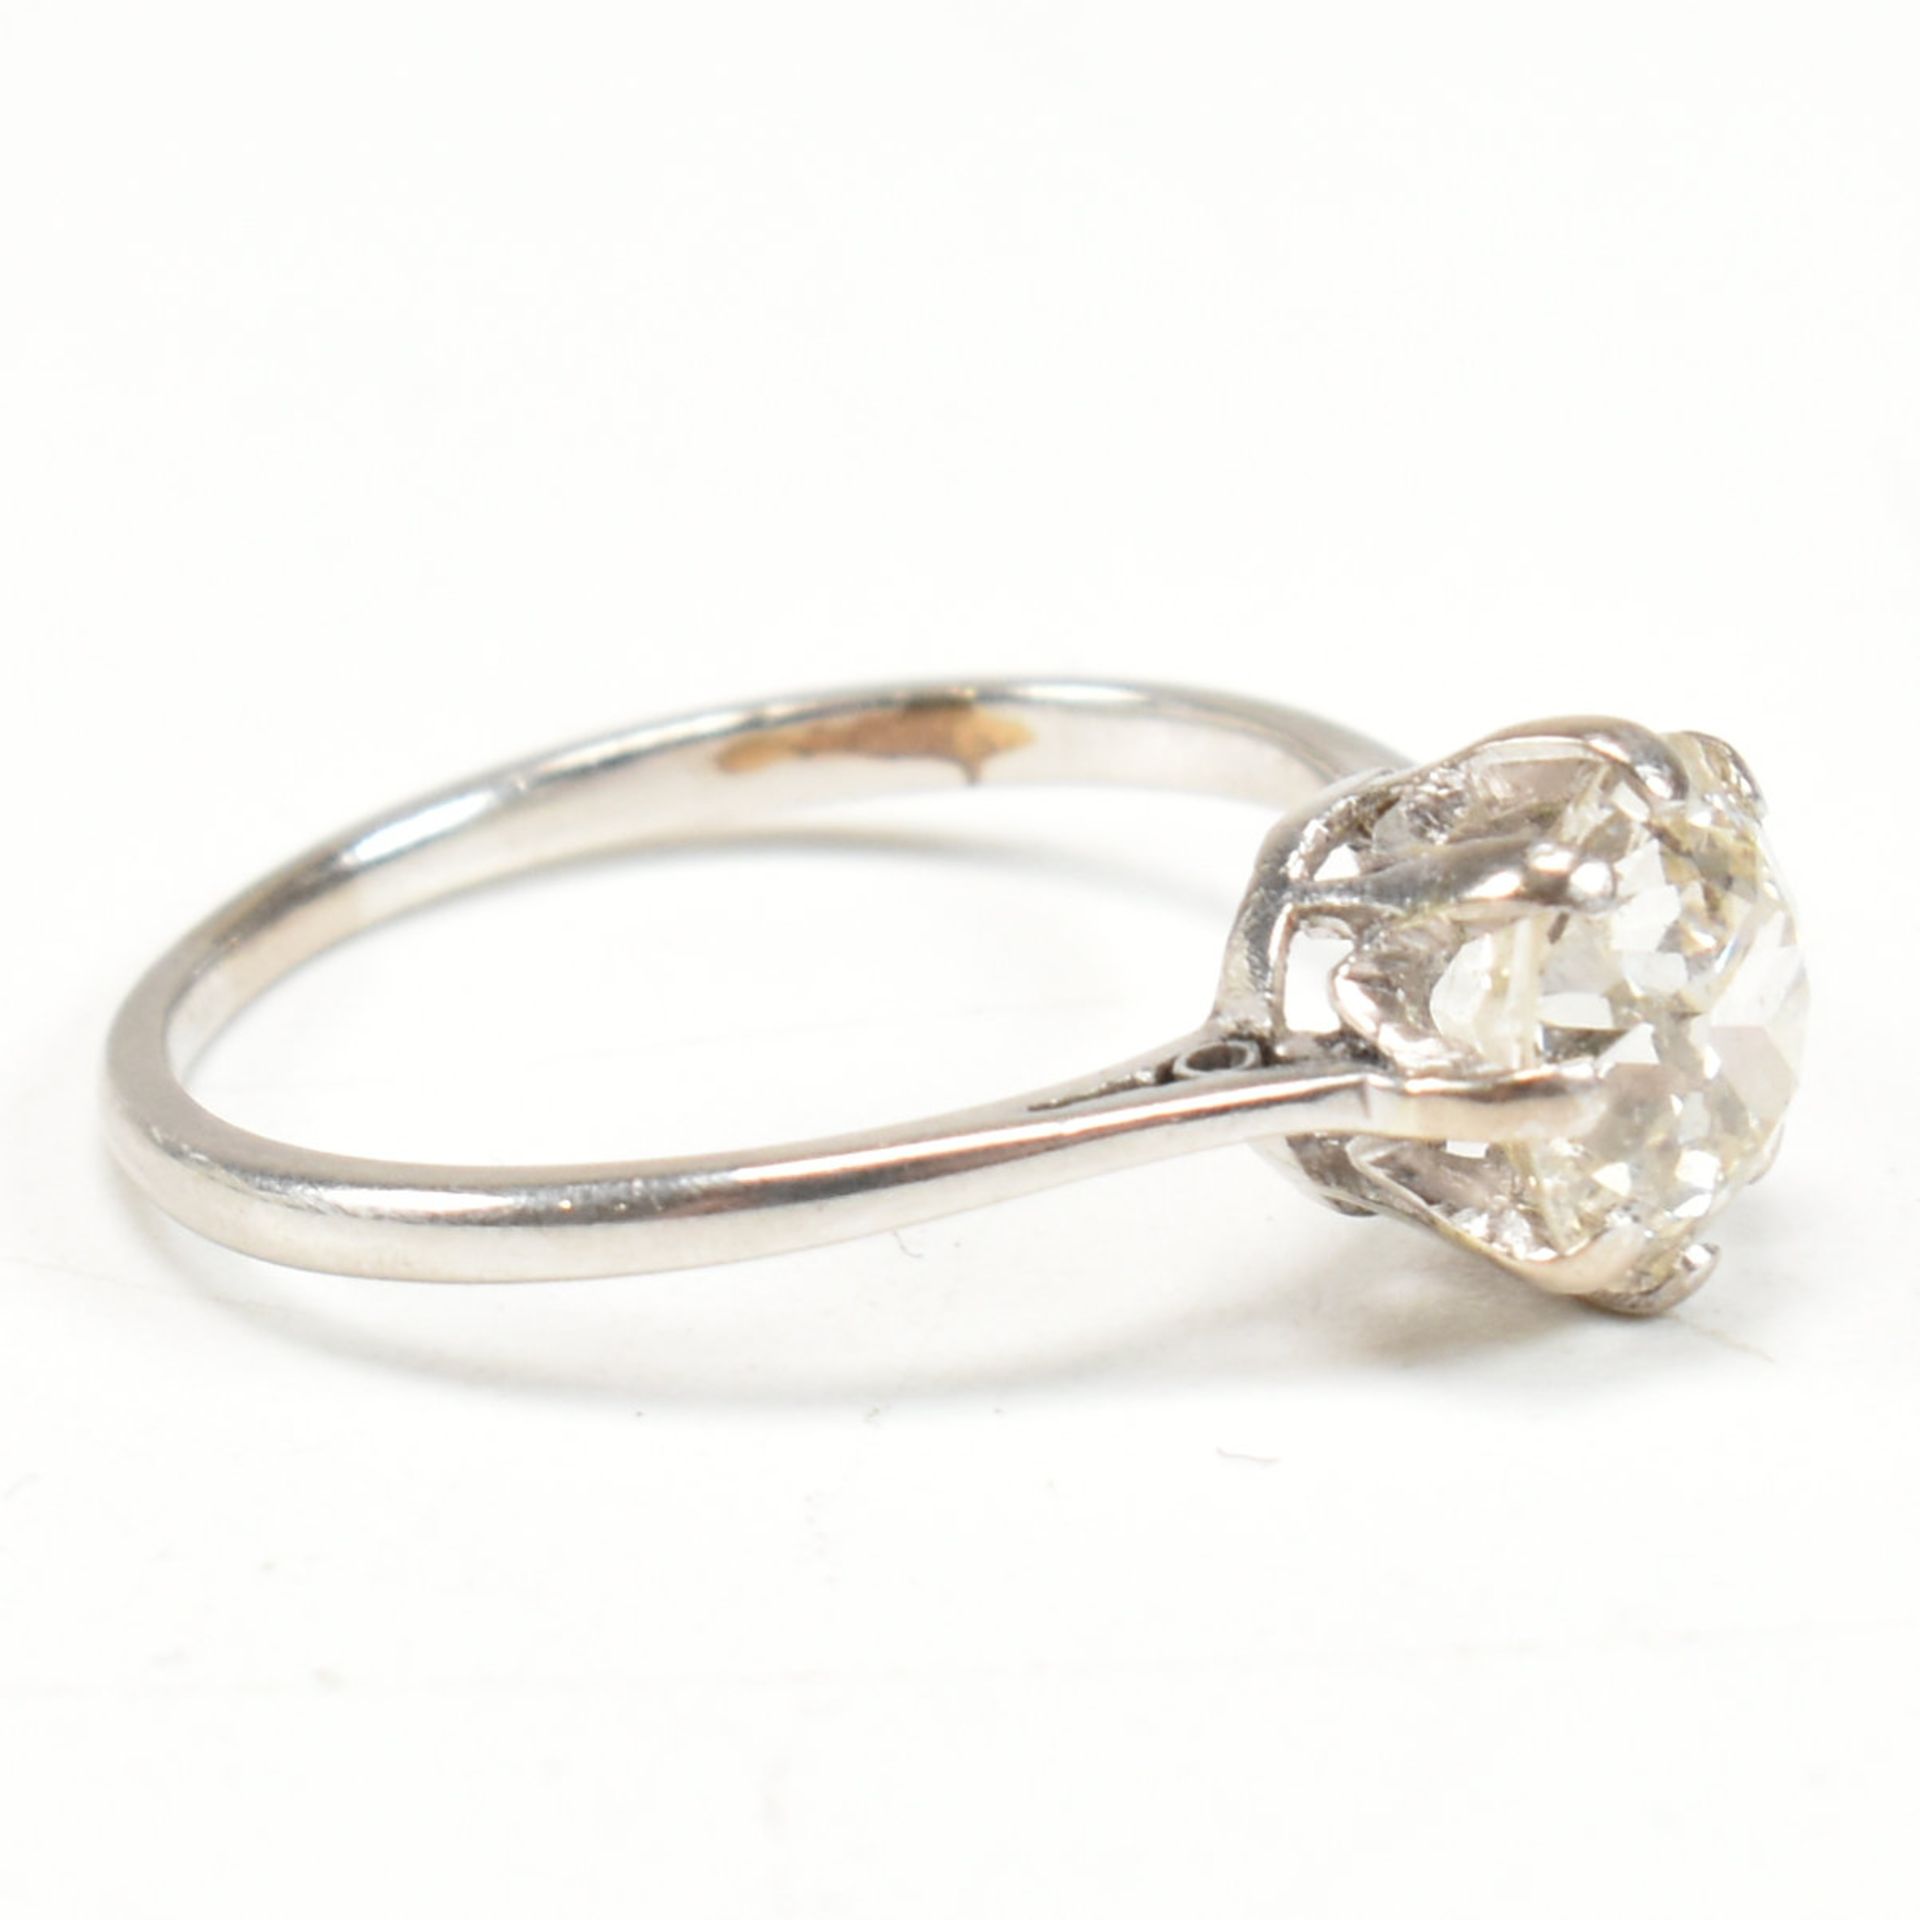 1930S 1.7CT DIAMOND SOLITAIRE RING - Image 3 of 9